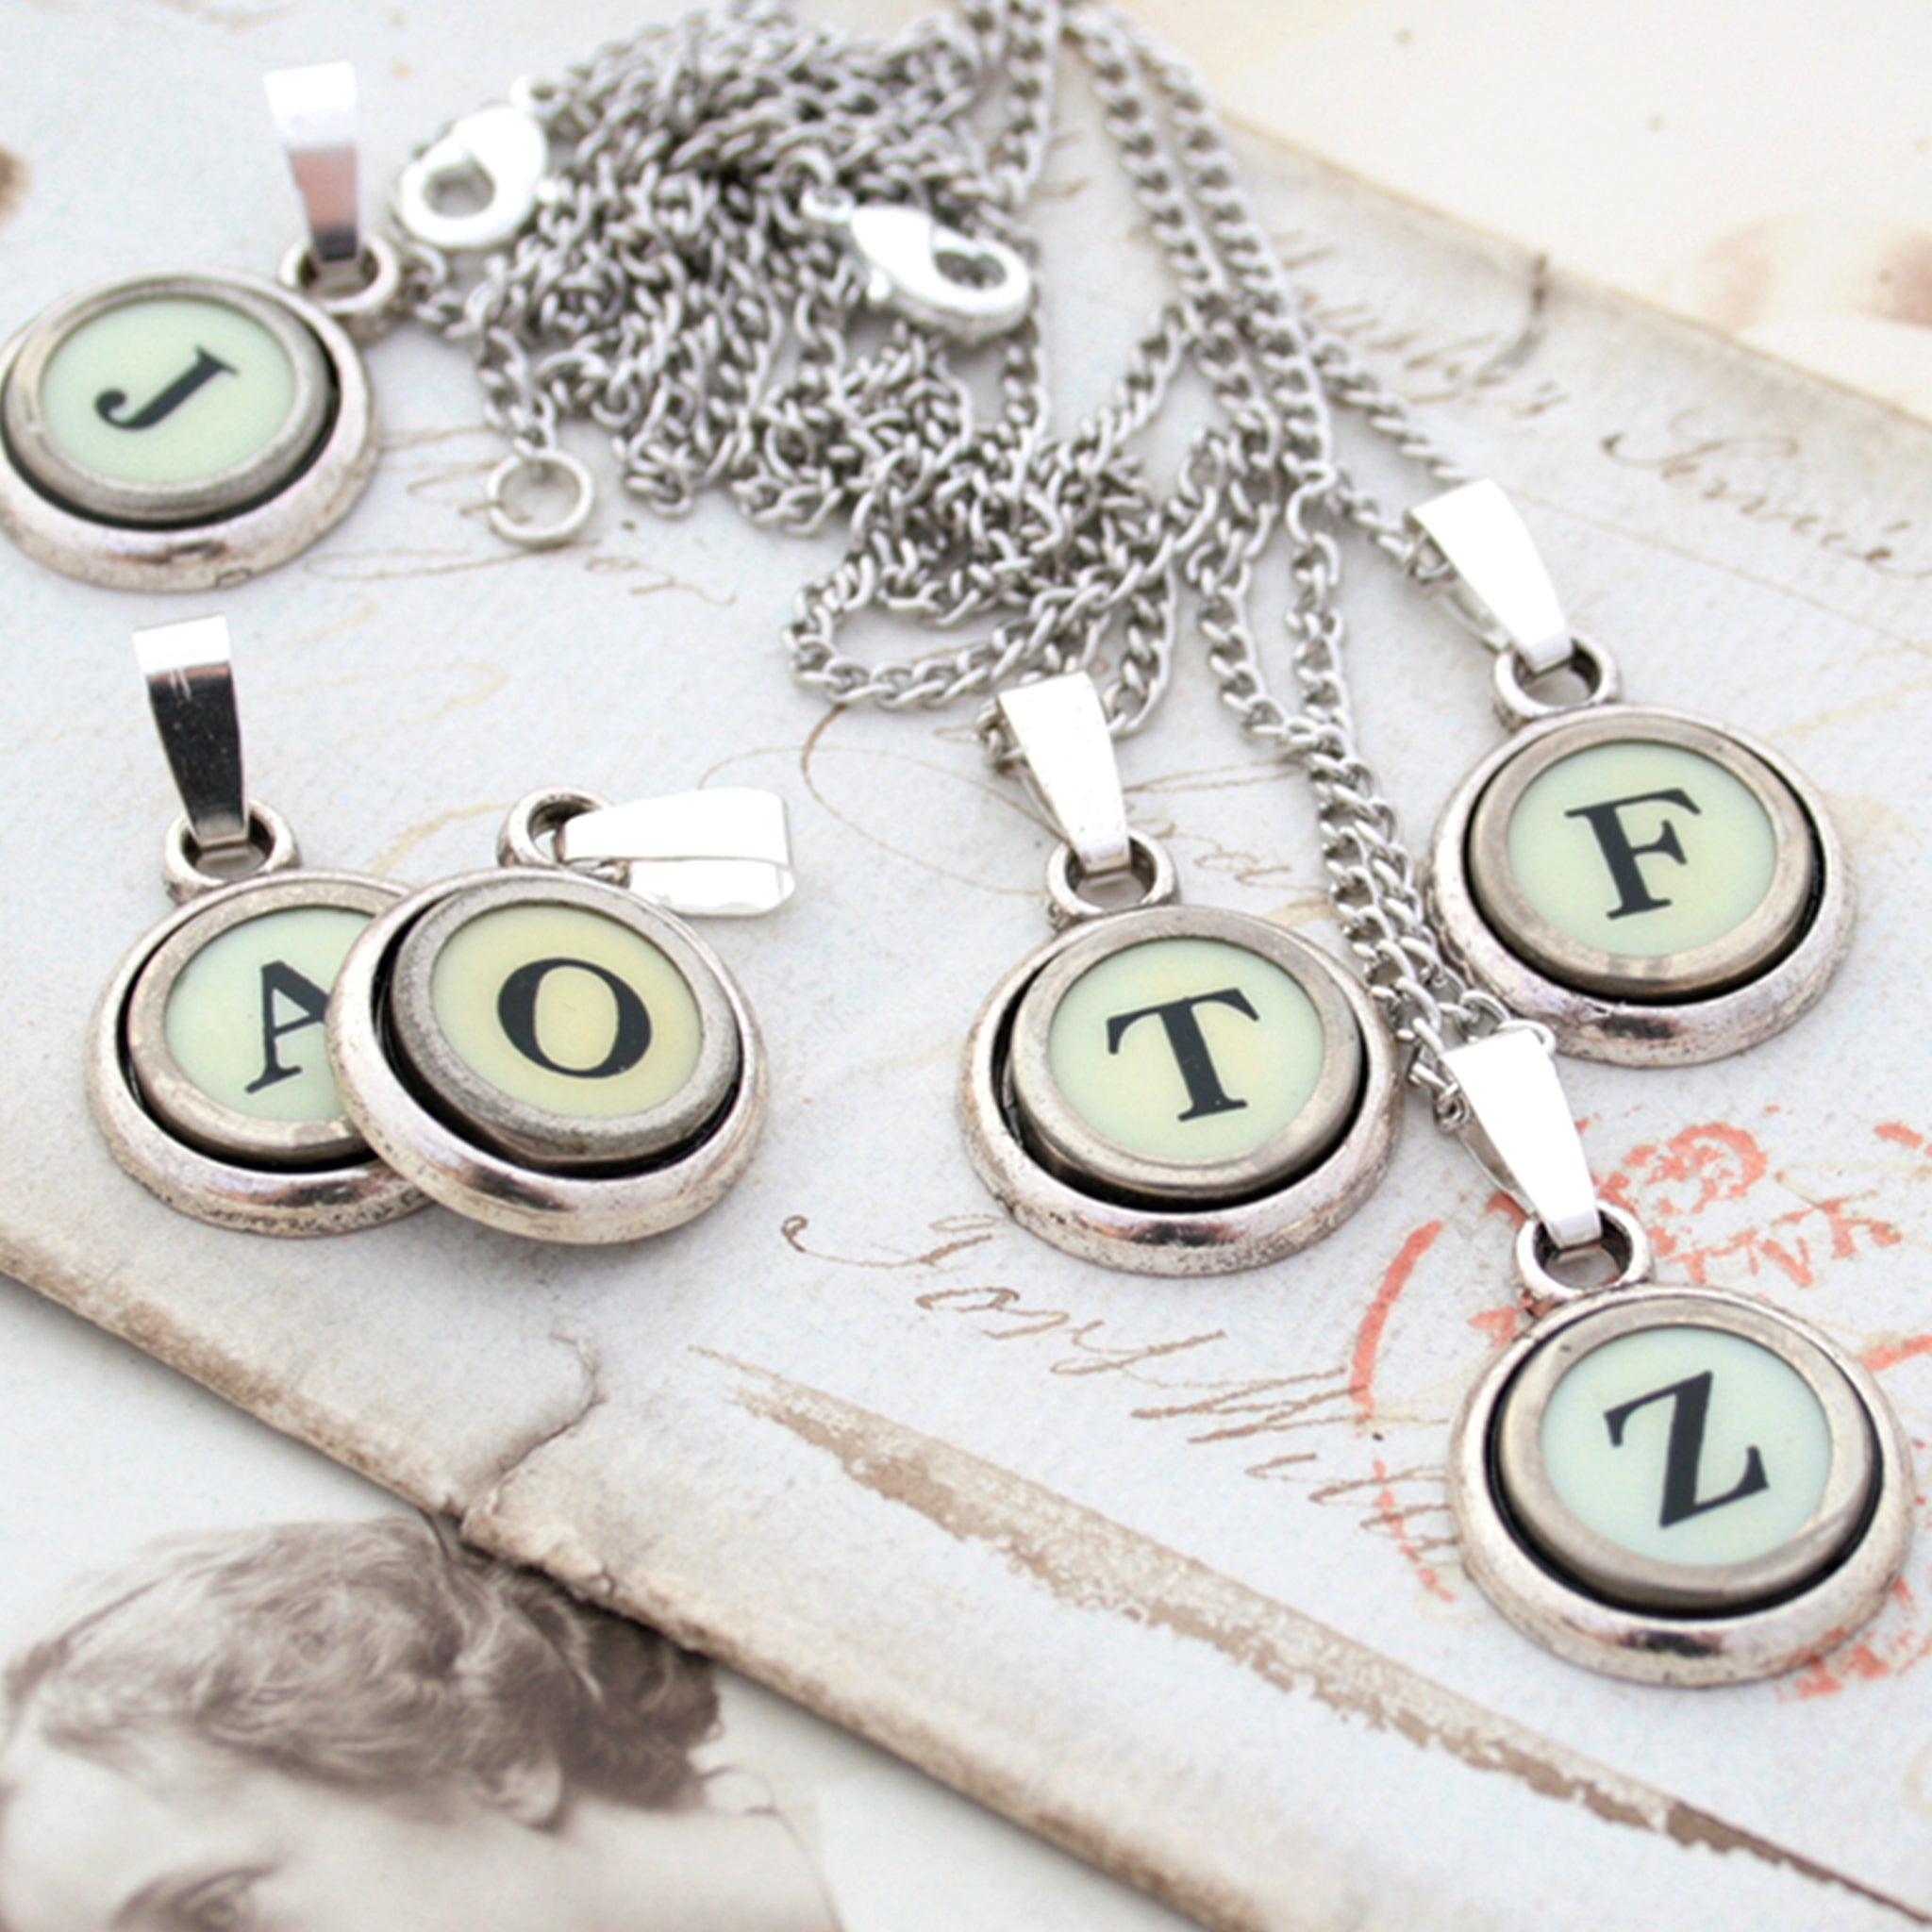 Ivory initial necklaces made of  typewriter keys